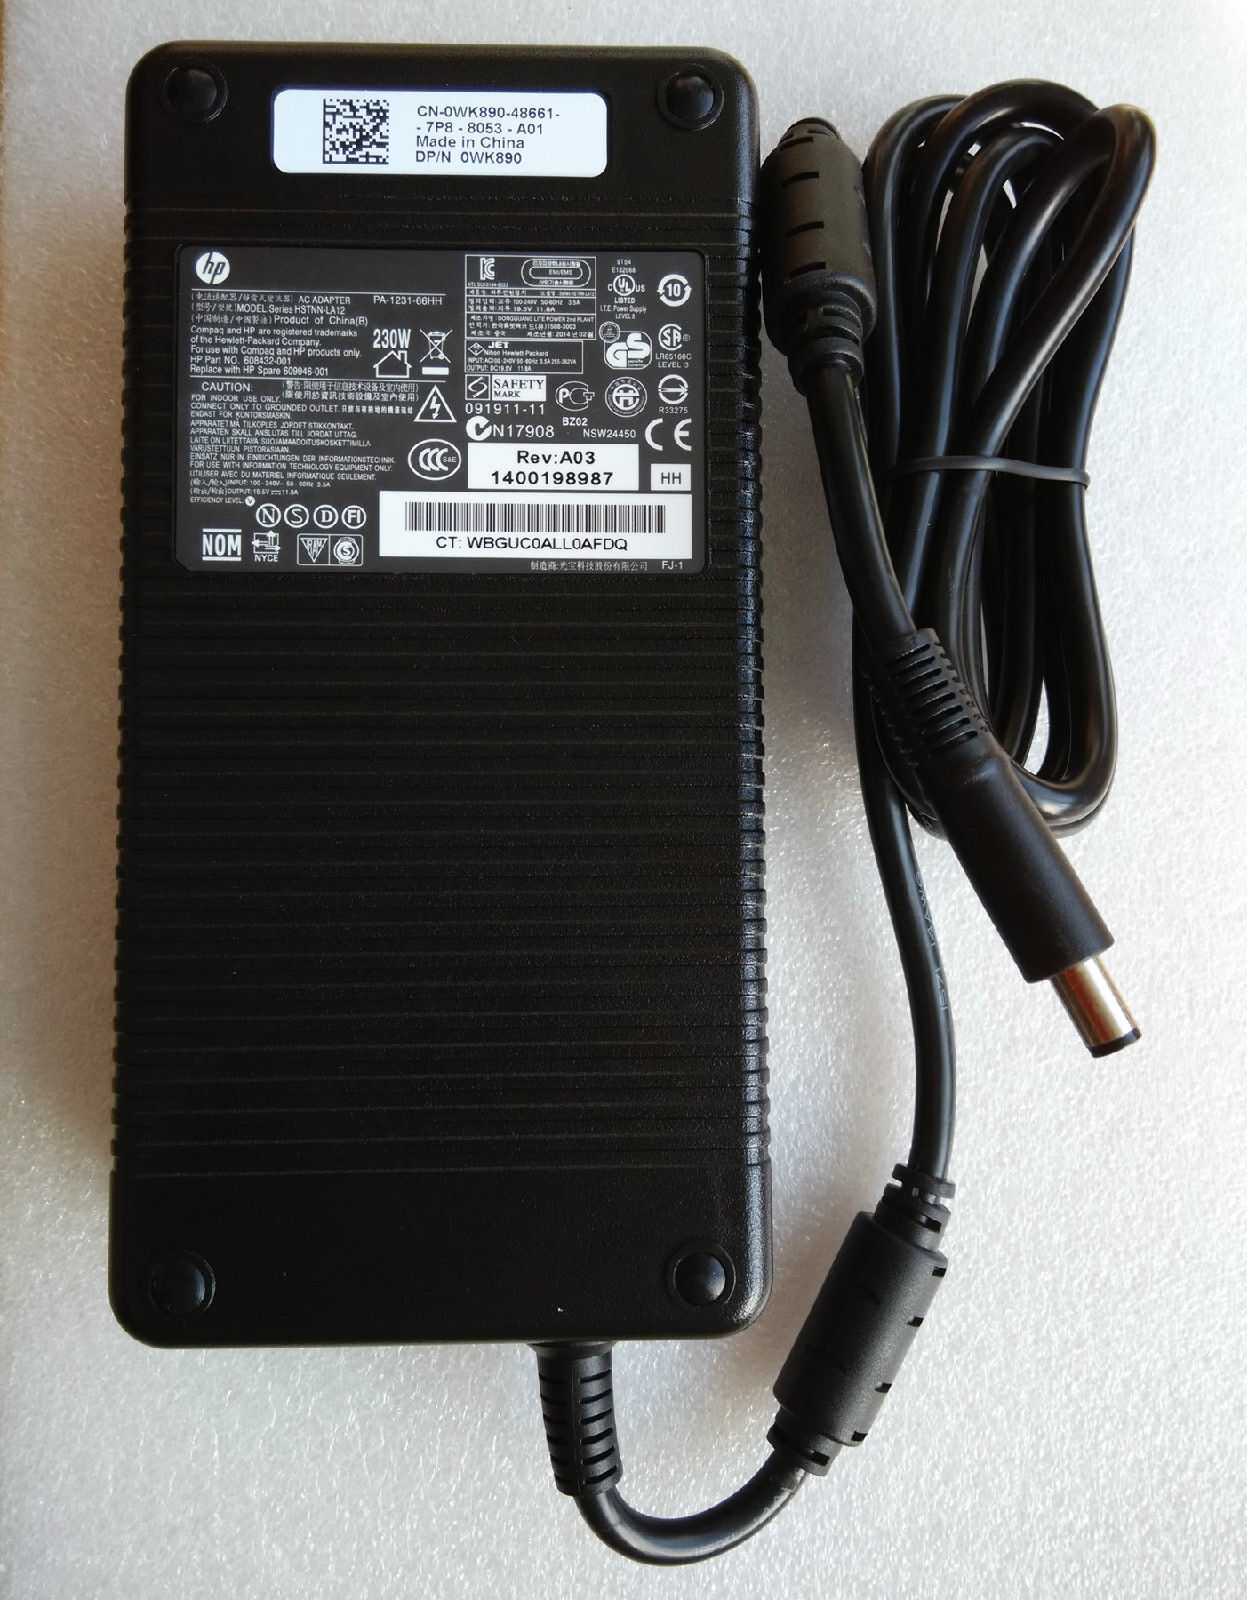 230W HP EliteBook 8770w 19.5V 11.8A AC Adapter Power Charger